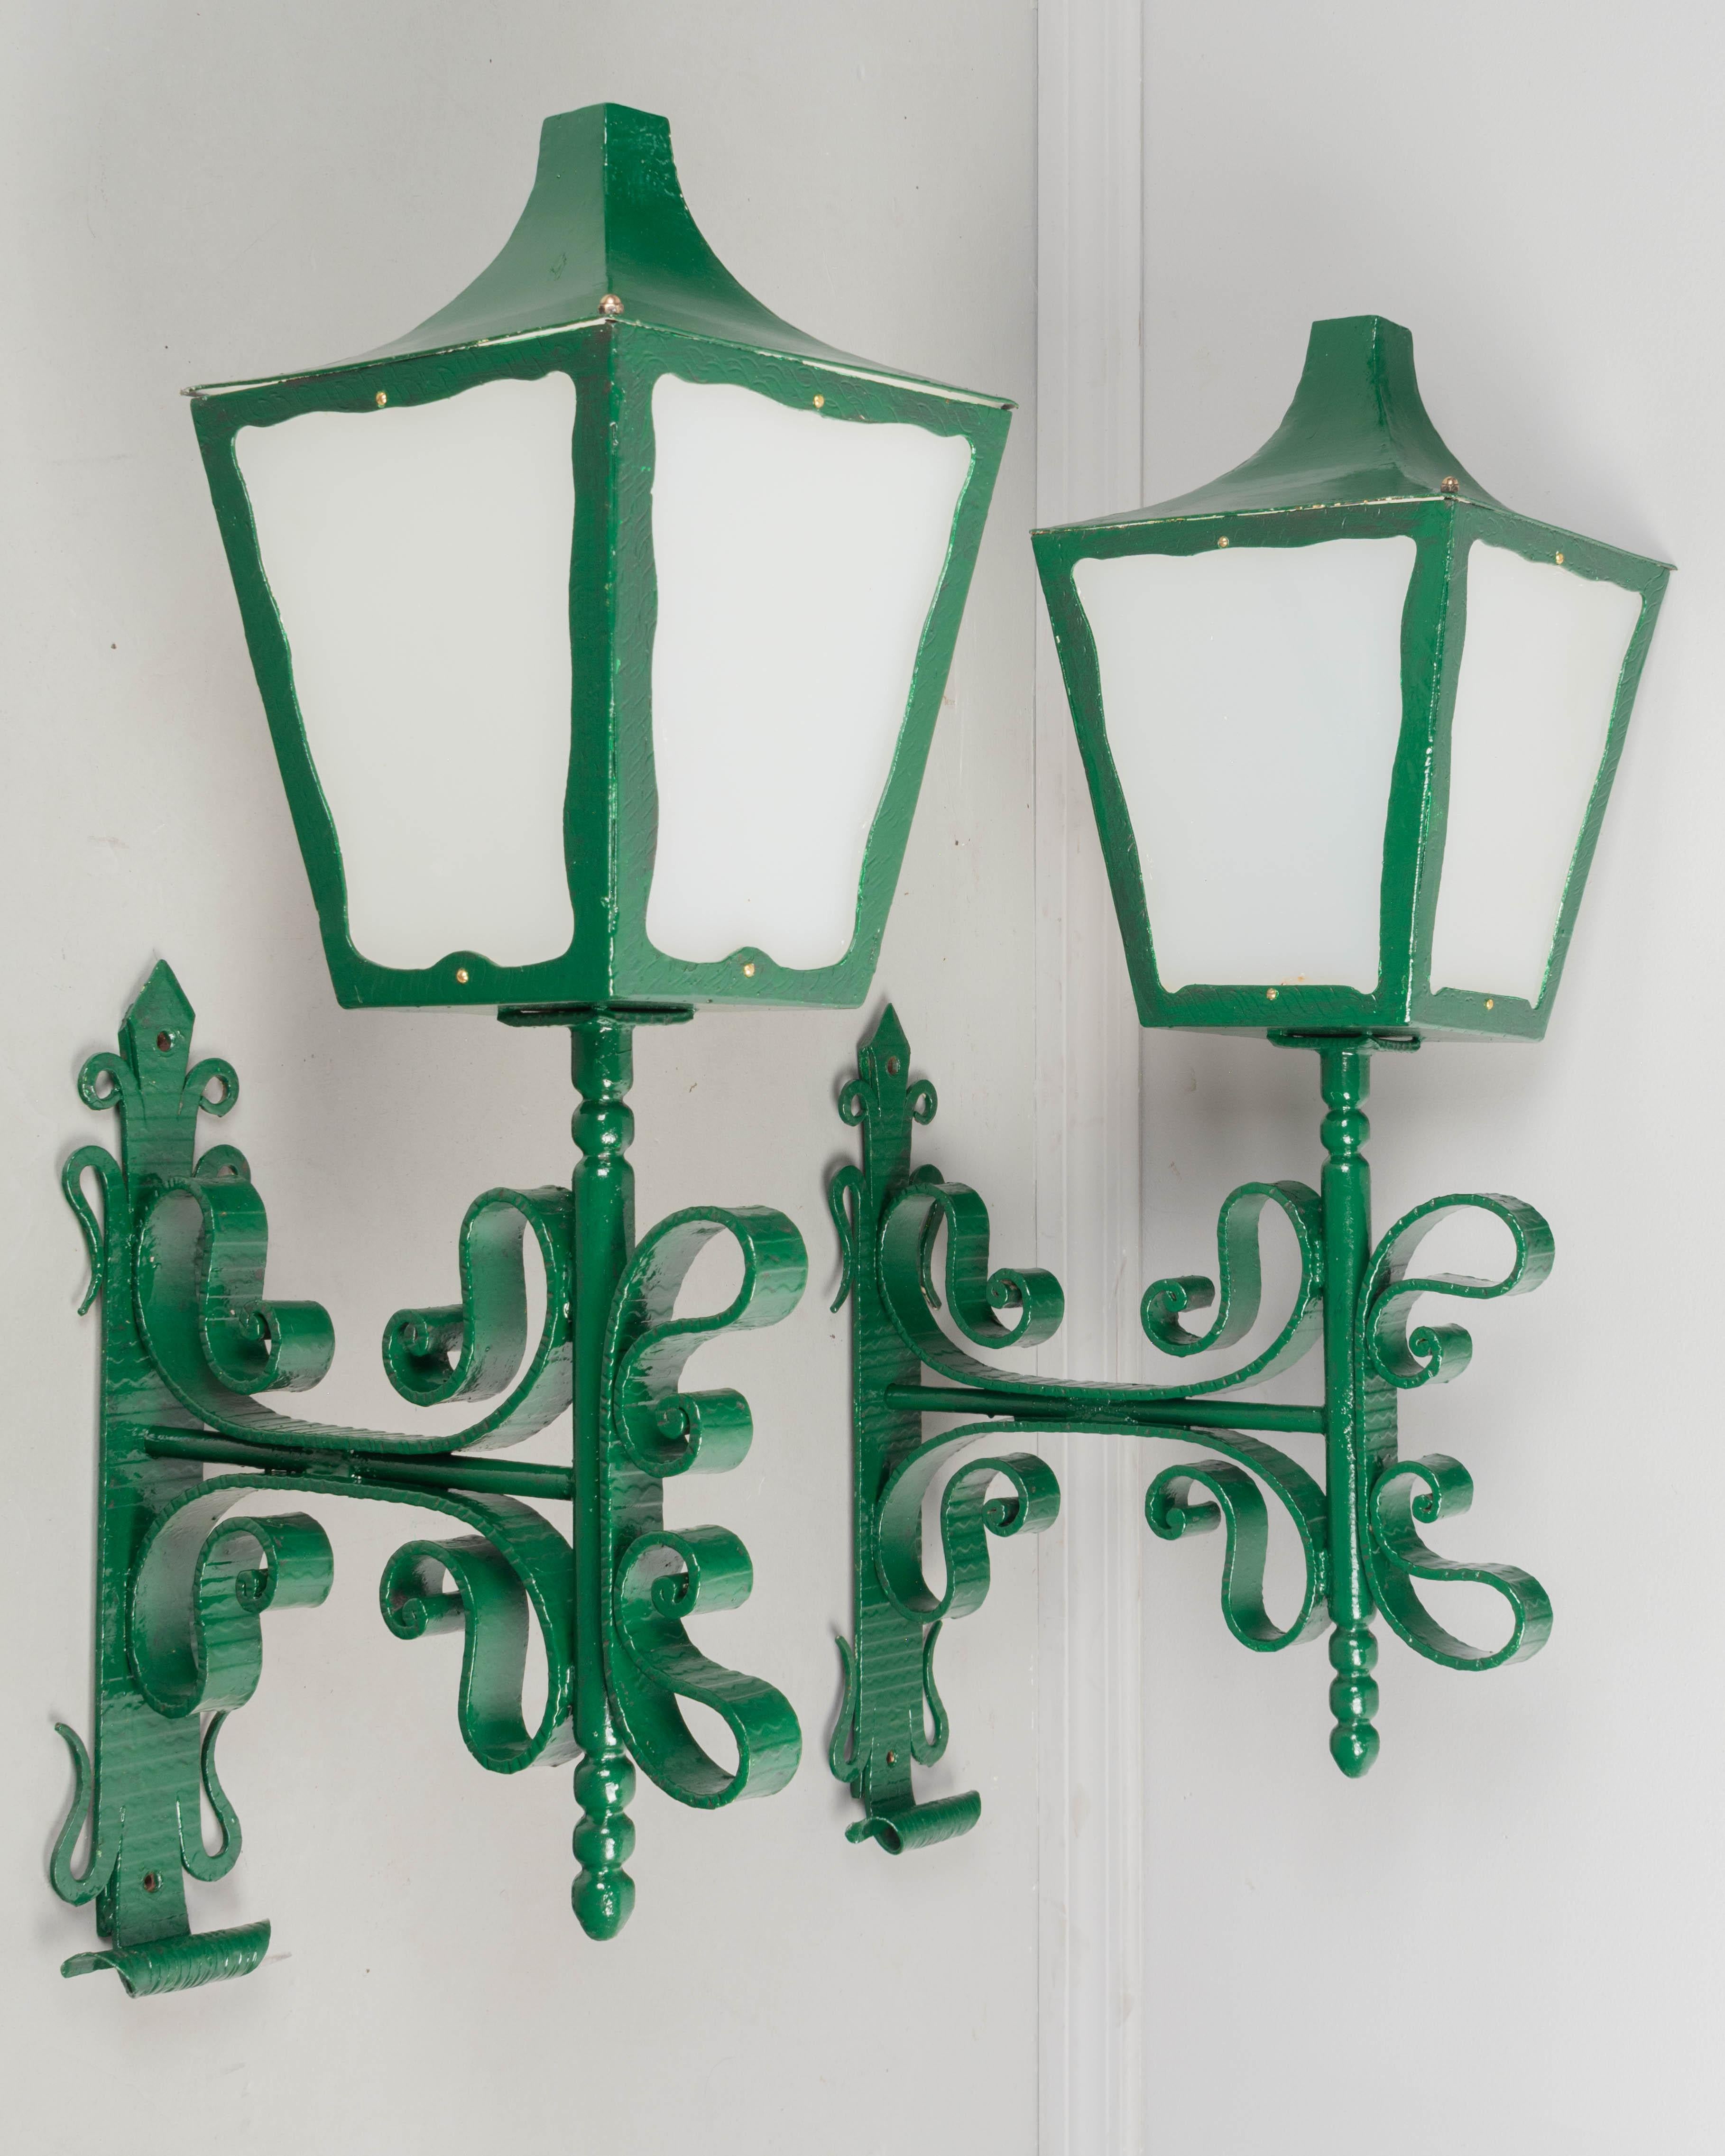 A pair of large scale architectural wall lanterns with decorative wrought iron brackets. Newly painted green with  opaque plexiglass panes. Rewired and in working condition. Circa 1950s.
Dimensions: 38